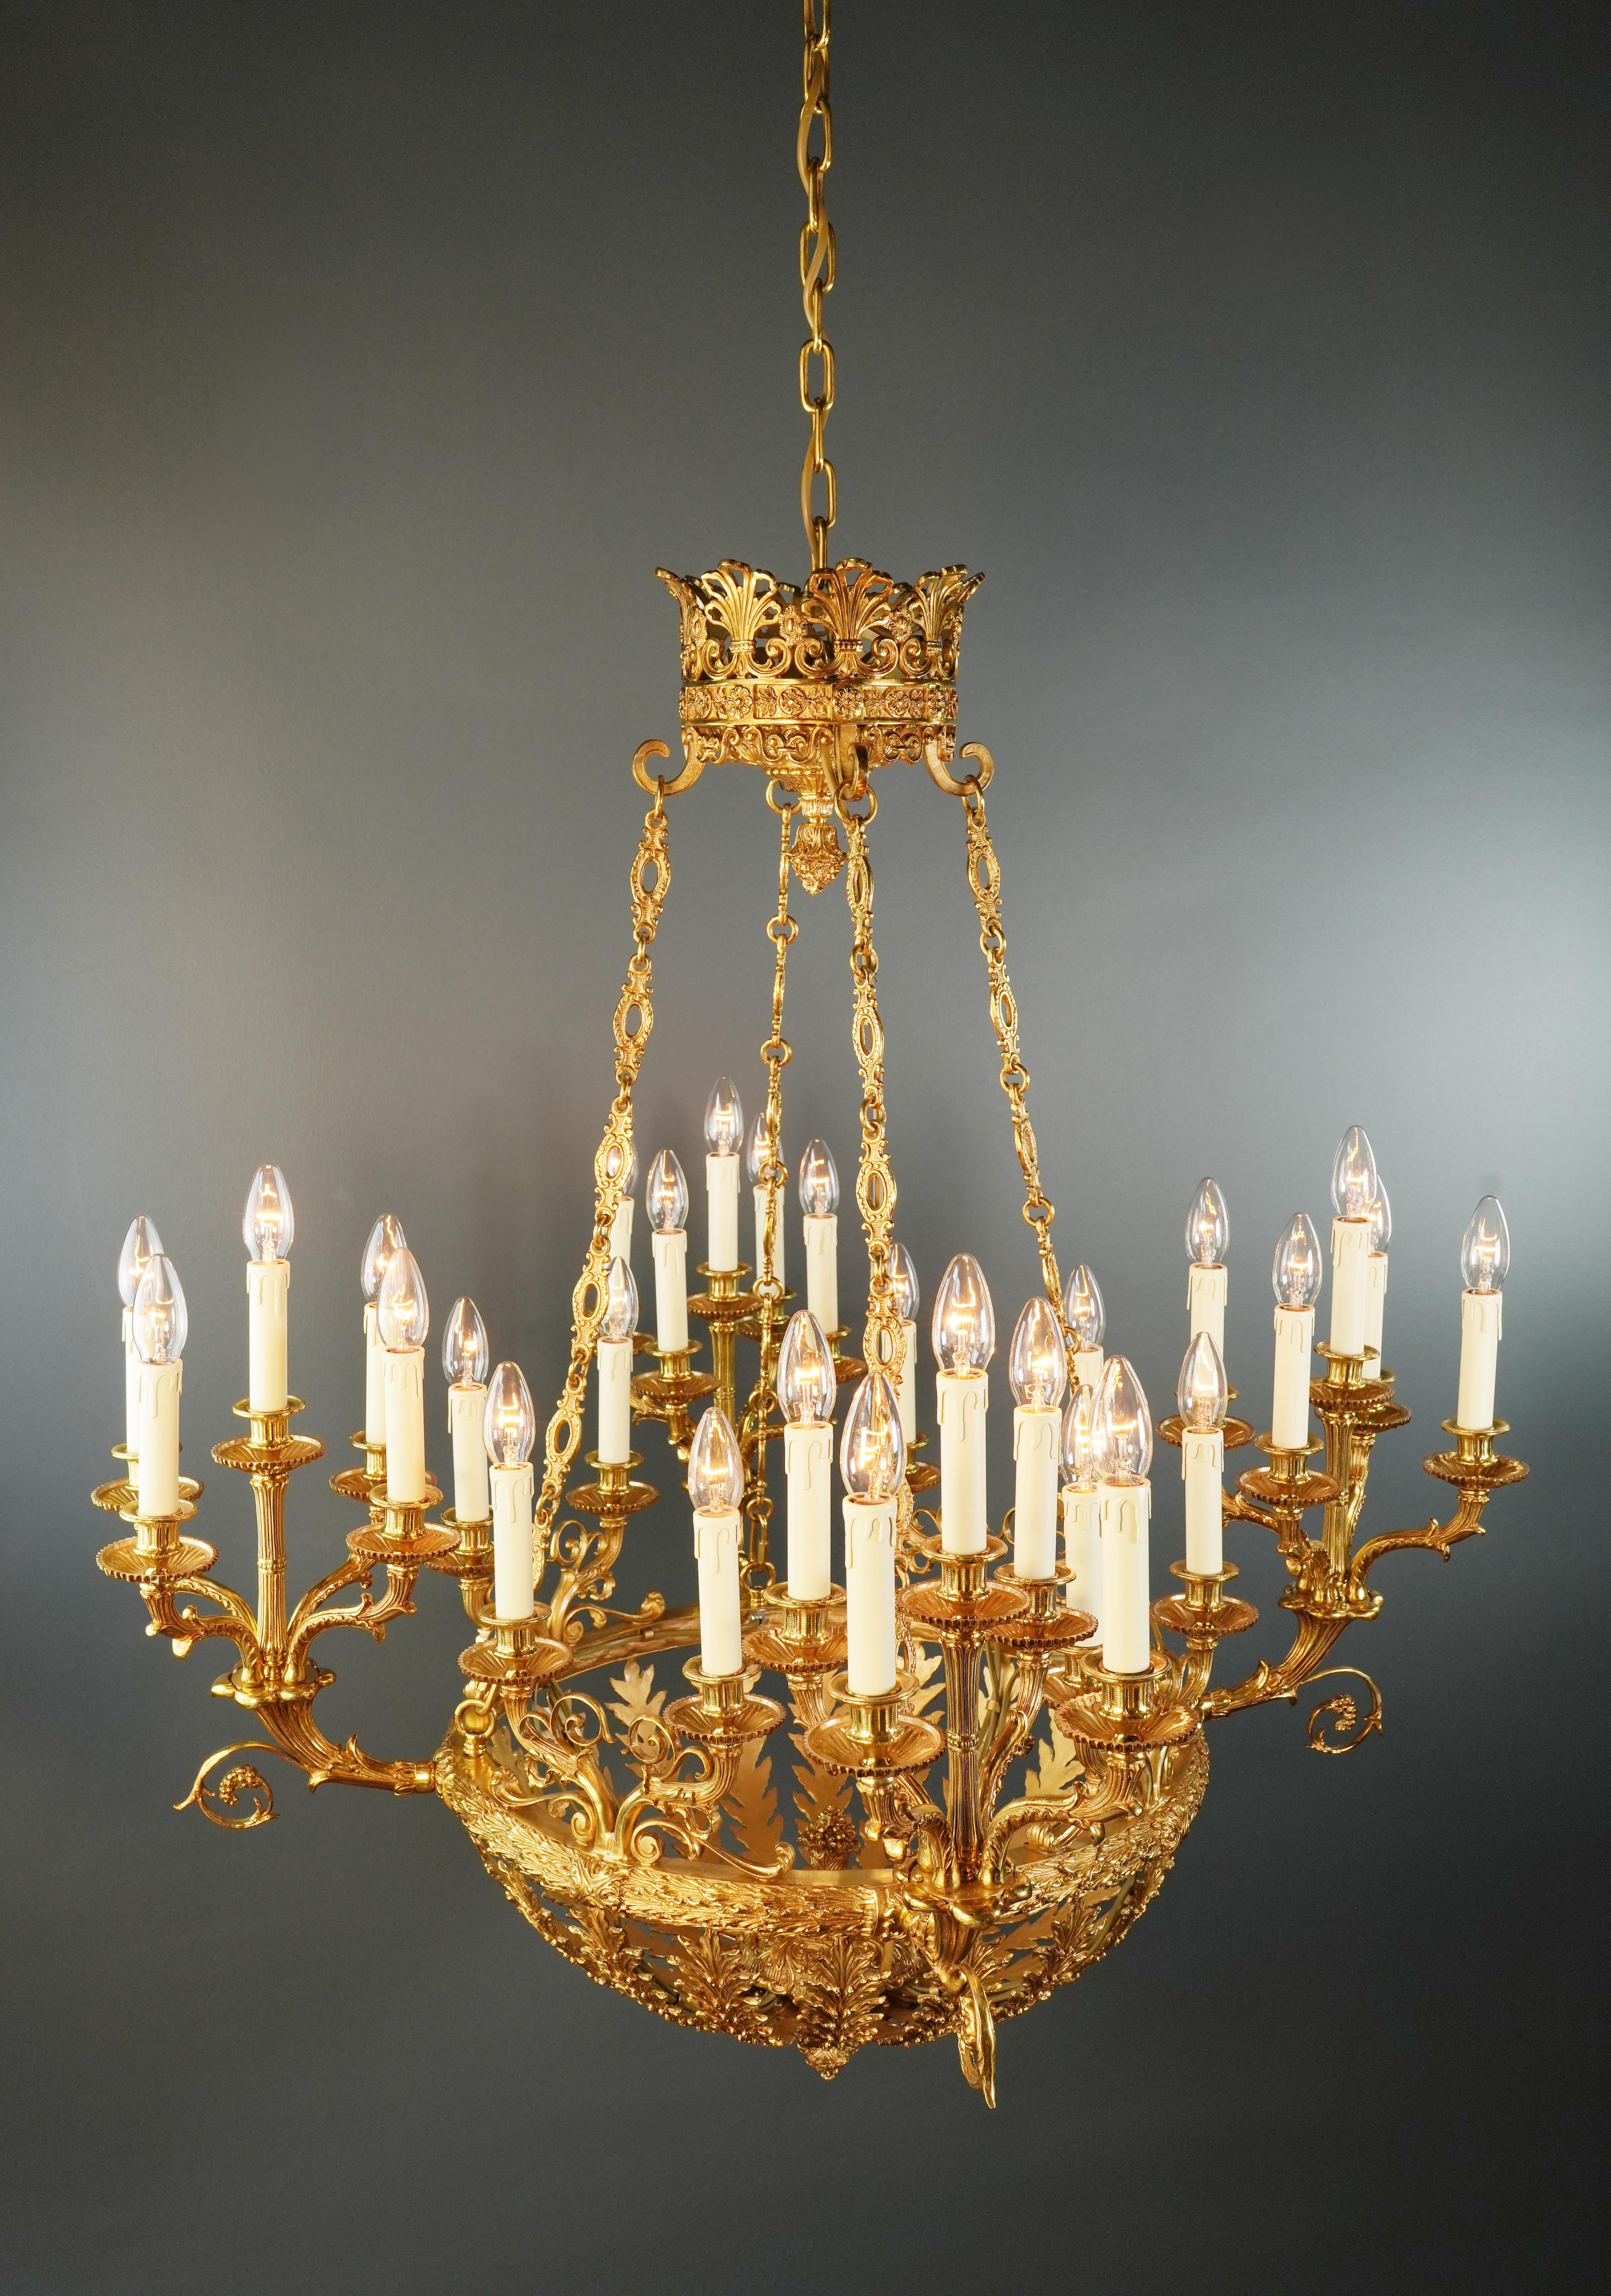 Contemporary 21st Century Baroque Brass Empire Chandelier Crystal Lustre Lamp Antique Gold  For Sale